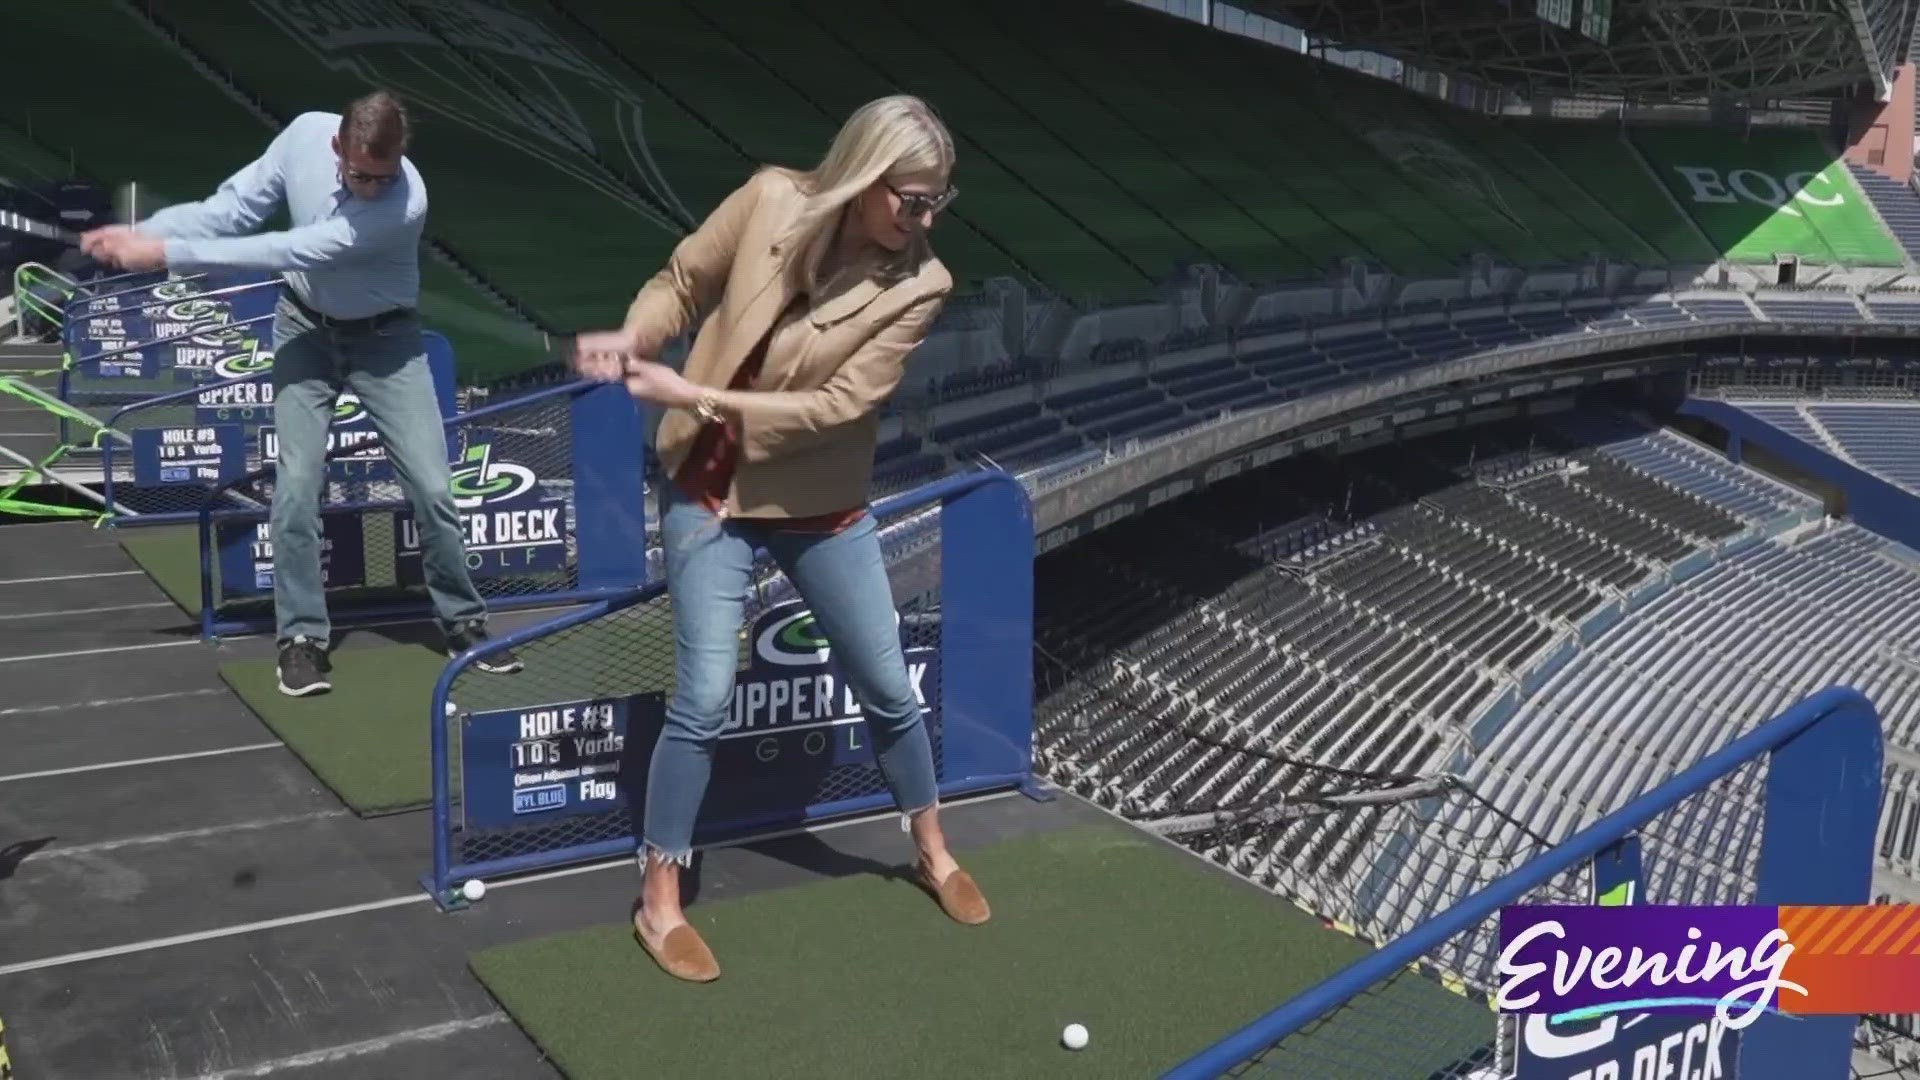 Upper Deck Golf is a pop-up event that takes place at stadiums across the country. #k5evening